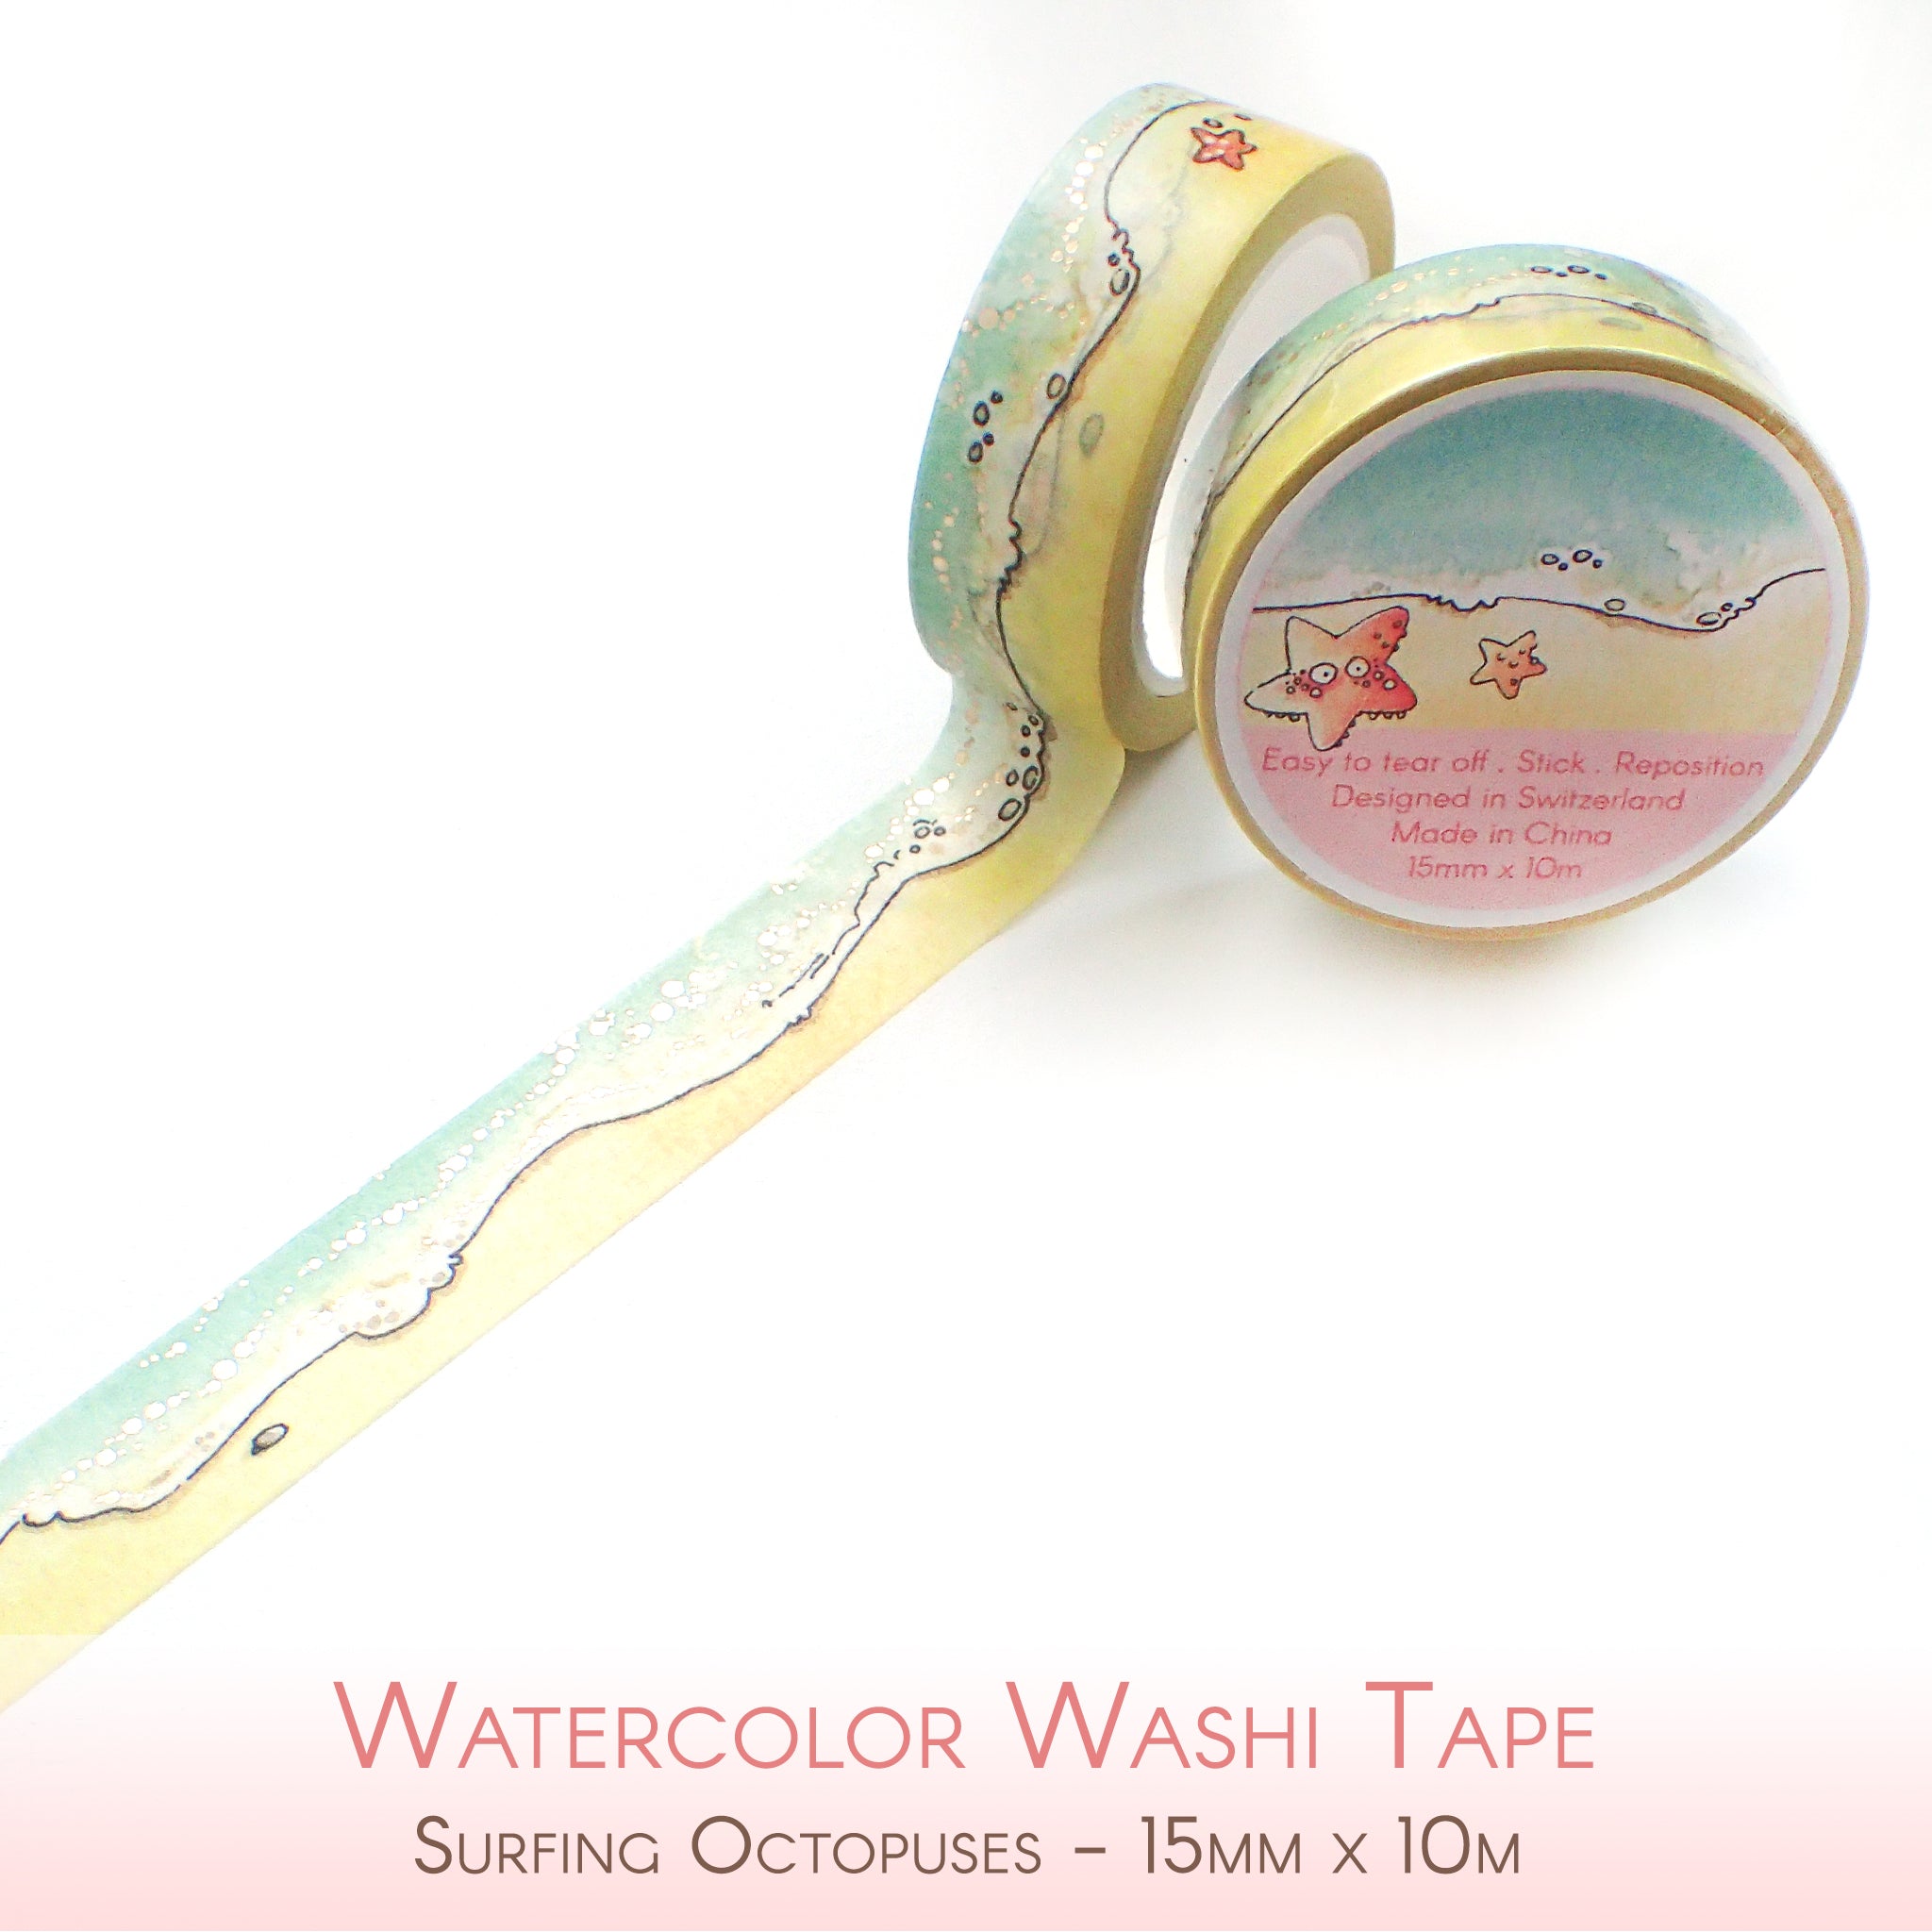 Christmas Woods - Foiled Washi Tape with Pink Snow – Linouspots